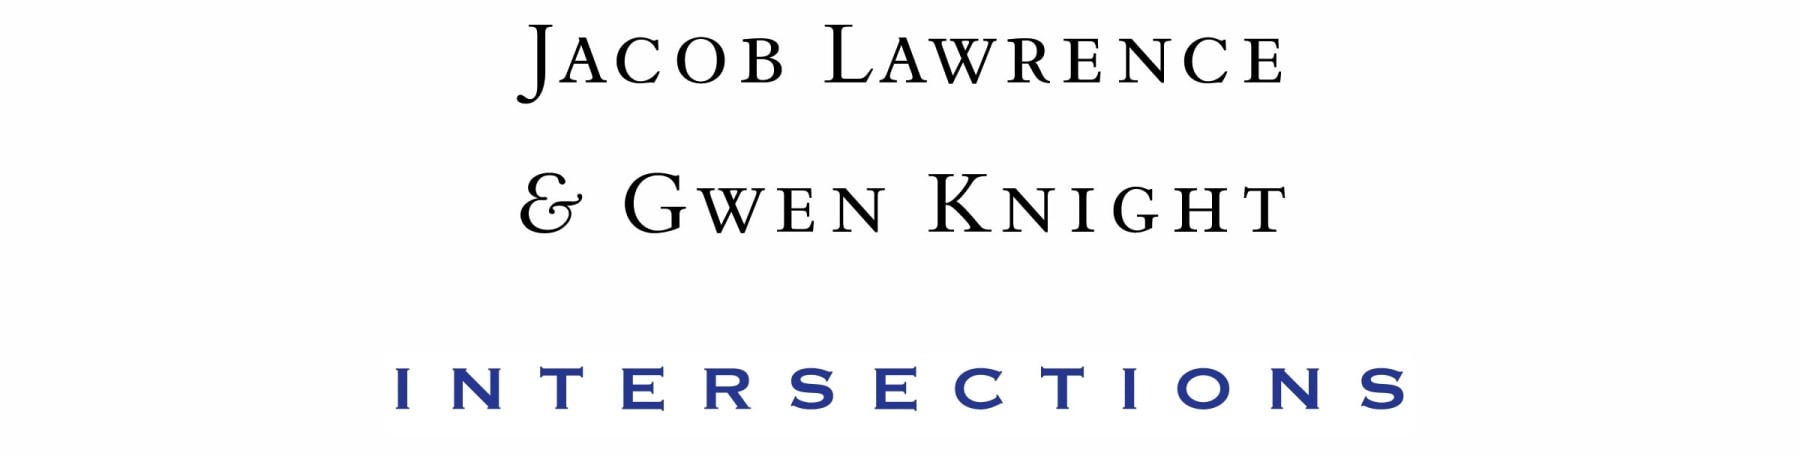 Jacob Lawrence & Gwen Knight: Intersections - February 16 - March 27, 2021 - Viewing Room - DC Moore Gallery Viewing Room